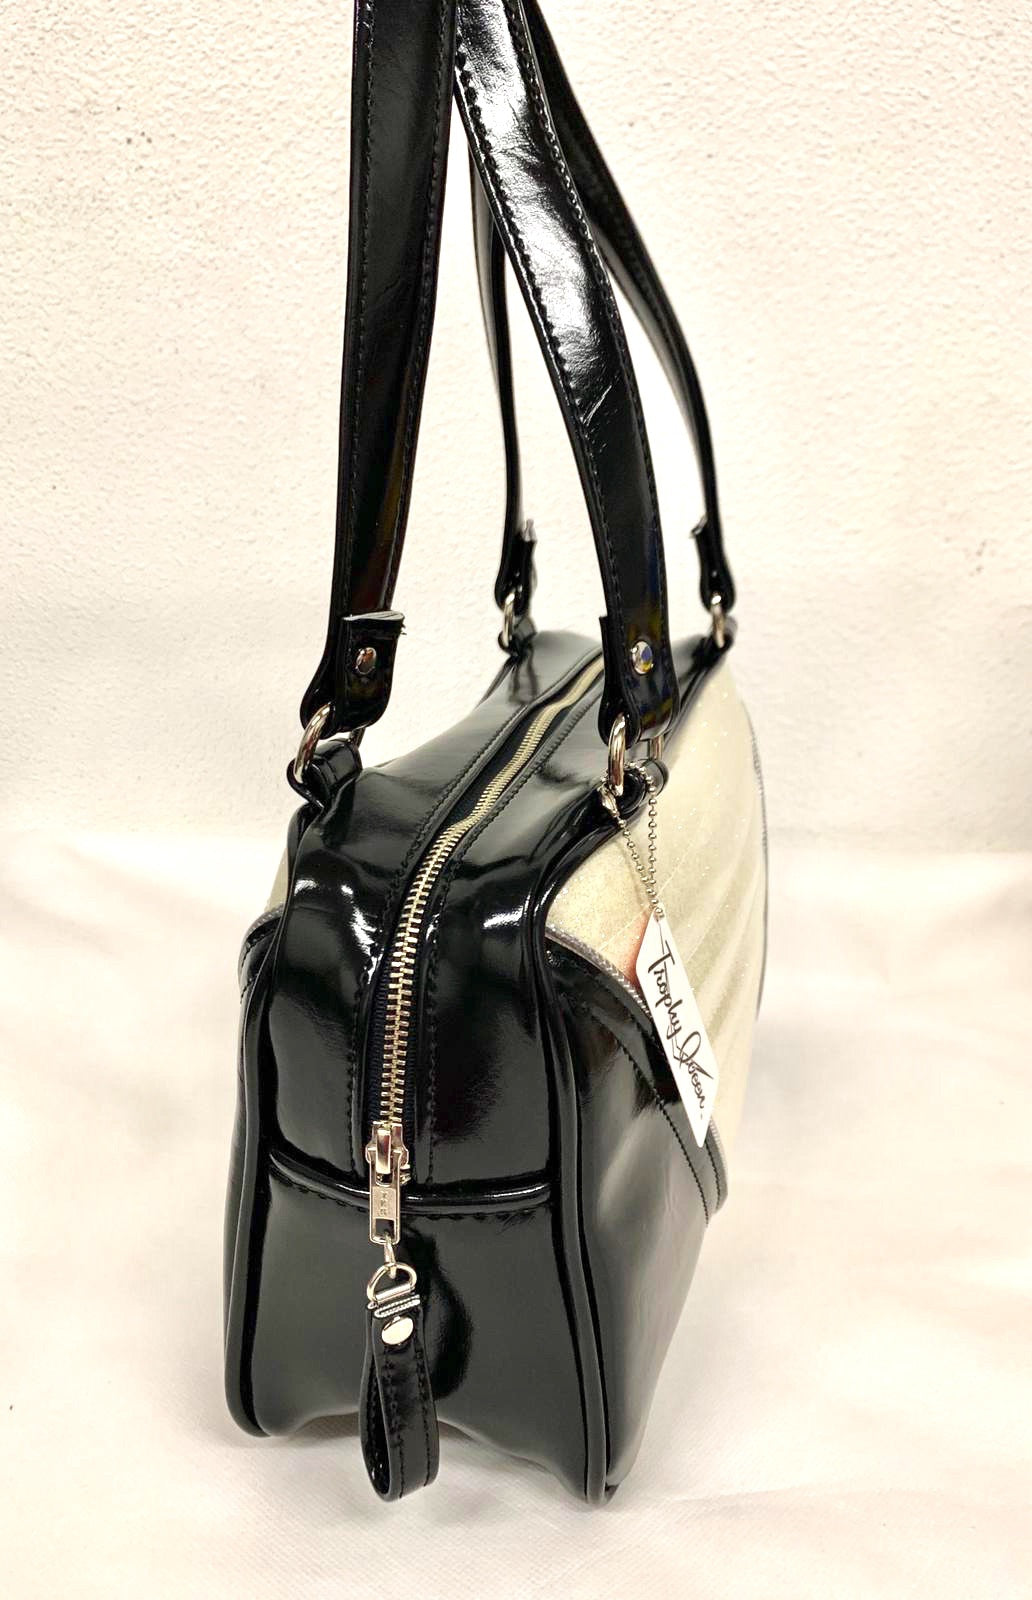 Comet Tote in grease black vinyl and white glitter piping with plush leopard lining handcrafted in California with nickel hardware, an extra set of straps, vinyl zipper pull, inside open divided pocket, zipper pocket with serial number inside and signature Trophy Queen label.